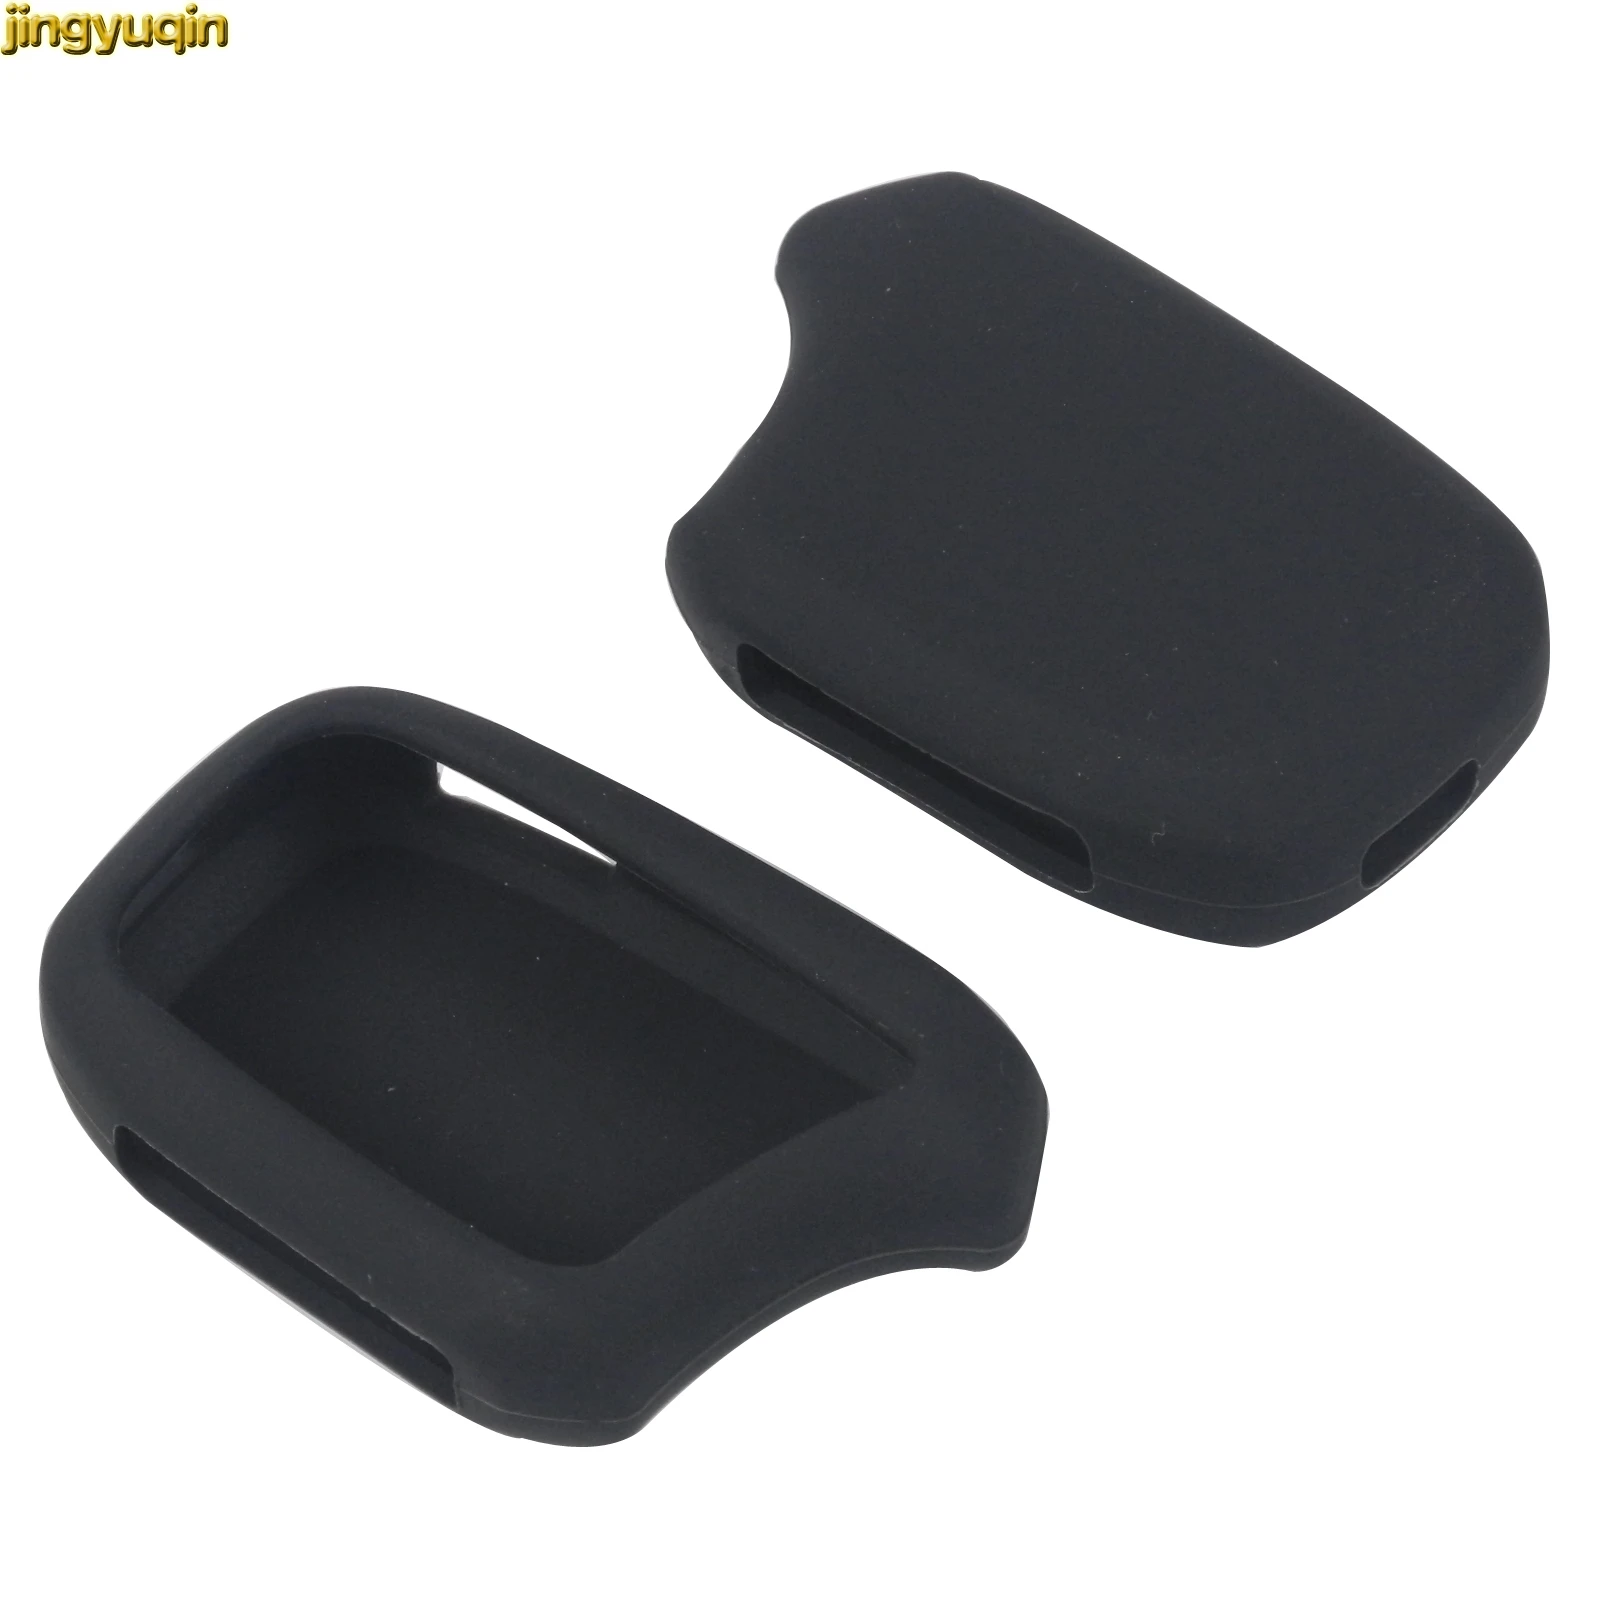 

Jingyuqin Silicone Key Chain Cover Case for MAGICAR KOREA Car Auto Security Alarm Two Way Remote Controller Rubber Car-styling